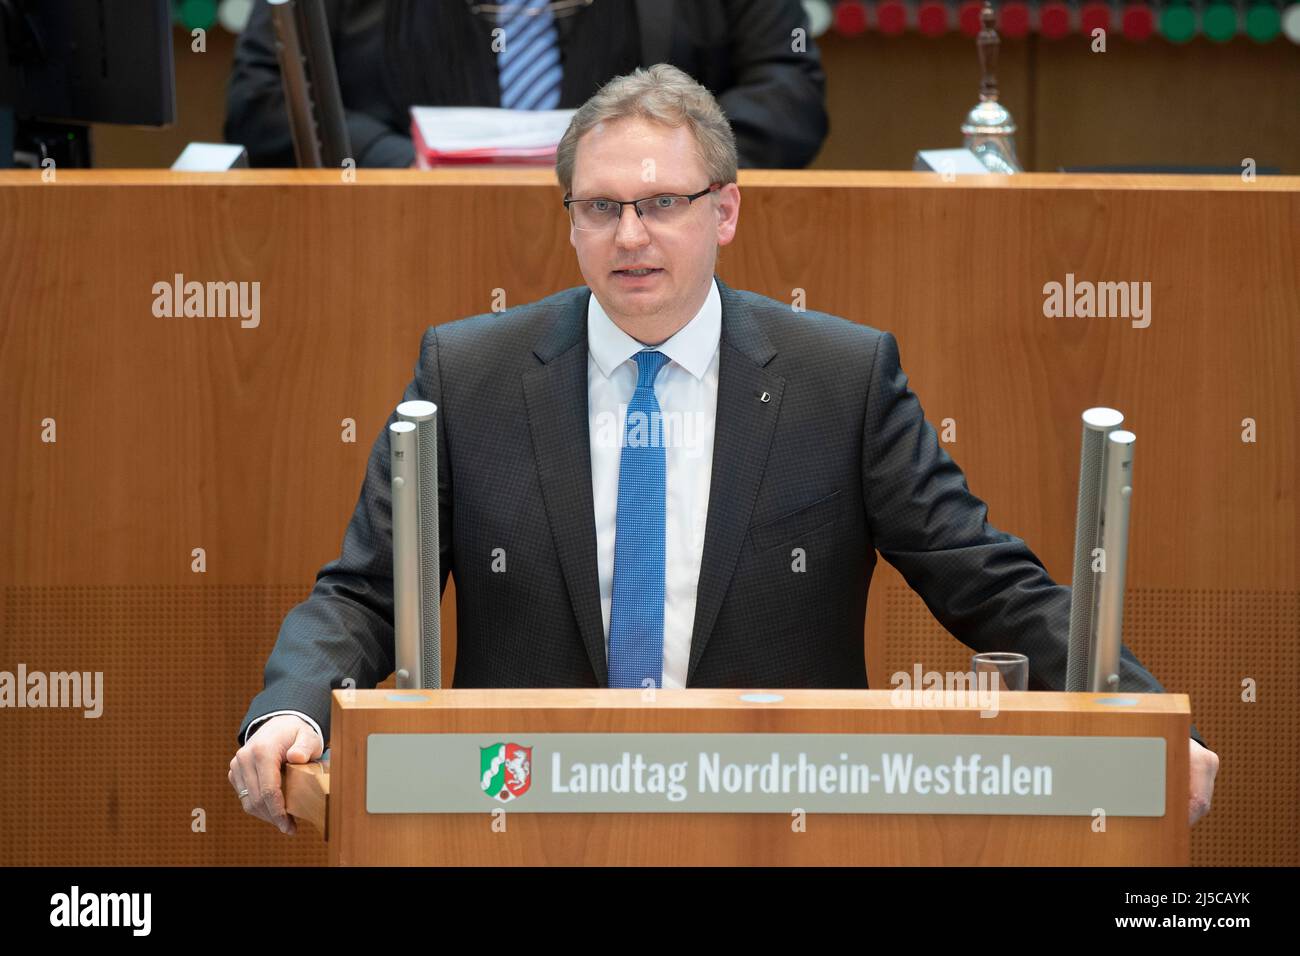 dr Dennis MAELZER, SPD parliamentary group, during his speech TOP 4: State Child Protection Act NRW and amendment of the Child Education Act, draft law of the state government, 169th session of the state parliament of North Rhine-Westphalia, in the state parliament of North Rhine-Westphalia, Duesseldorf on January 27th, 2022, ÃÂ Stock Photo